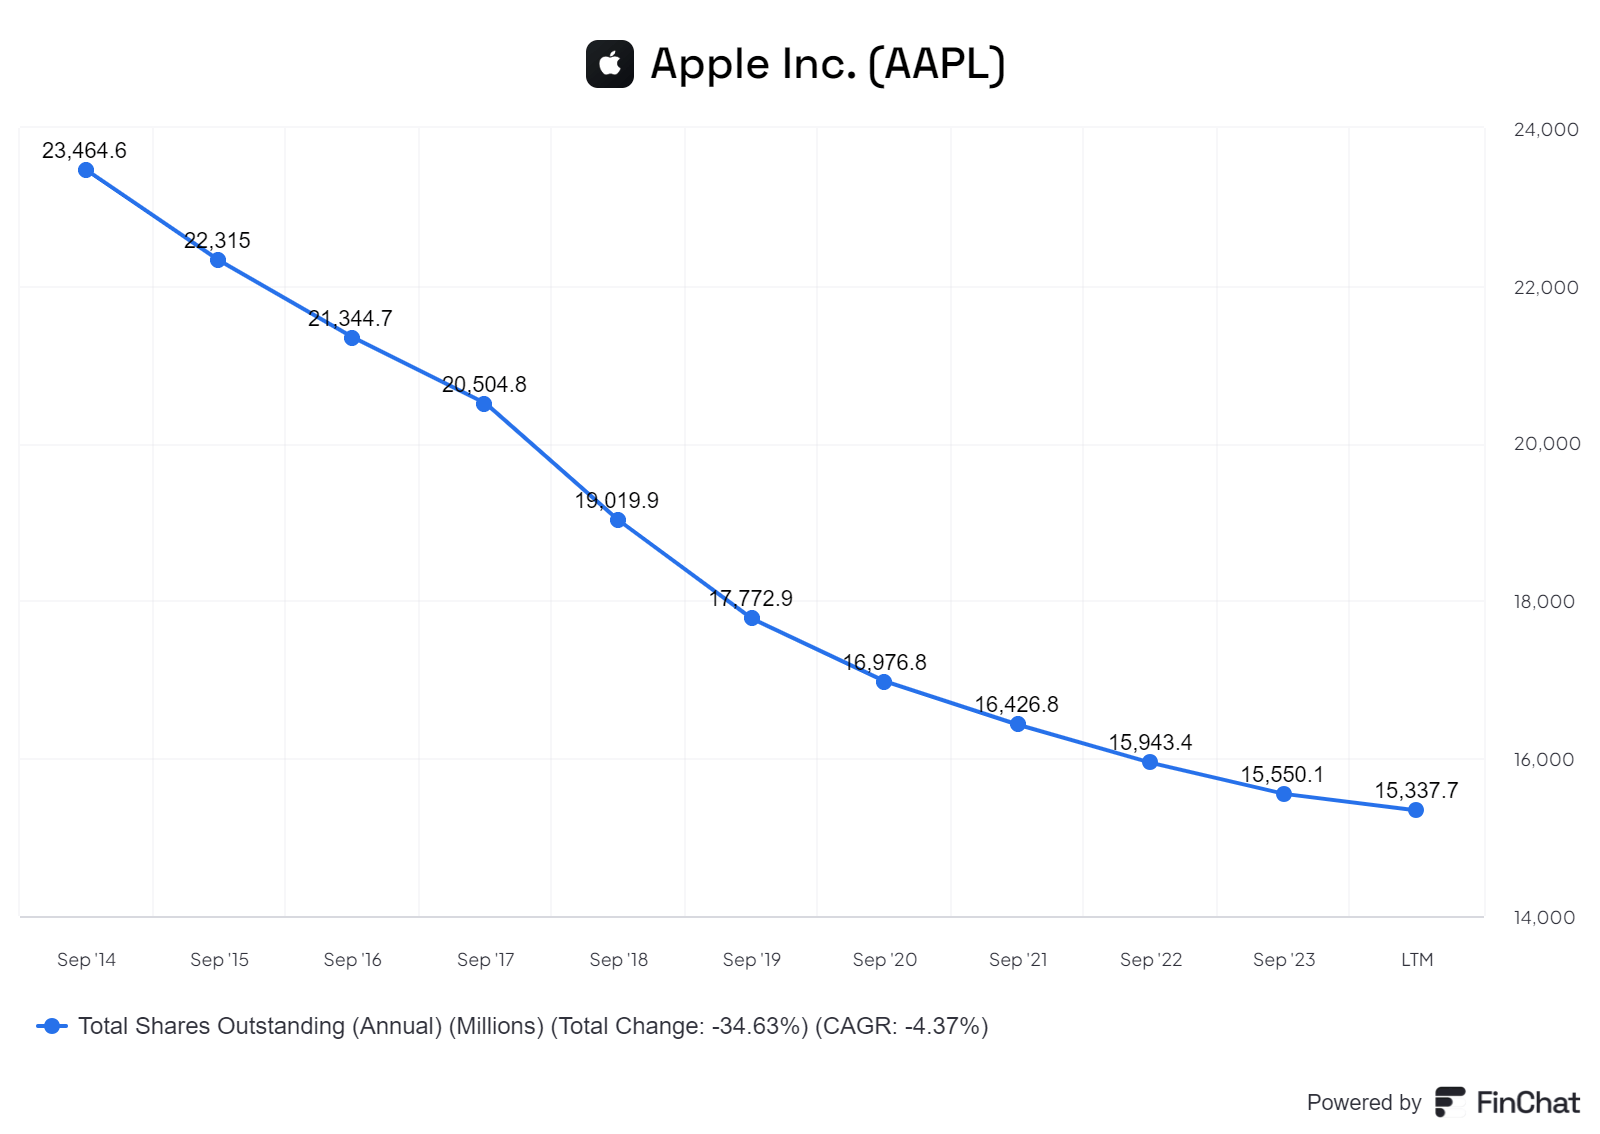 aapl total shares outstanding over time